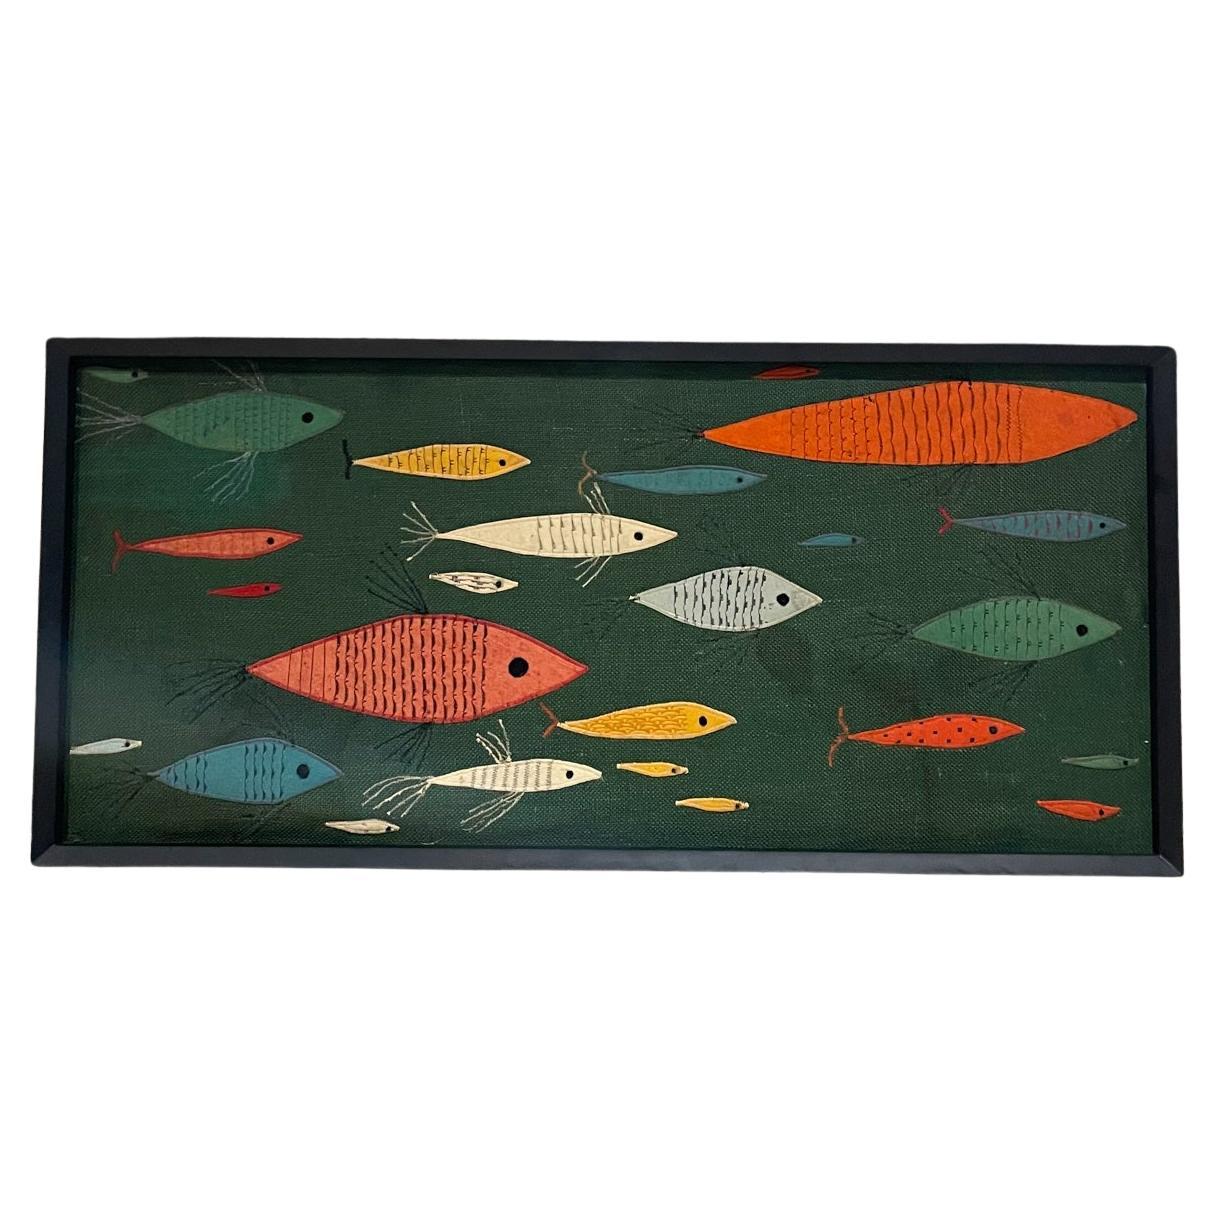 1970s Modernist Colorful School of Fish Art Wall Tapestry Framed in Black